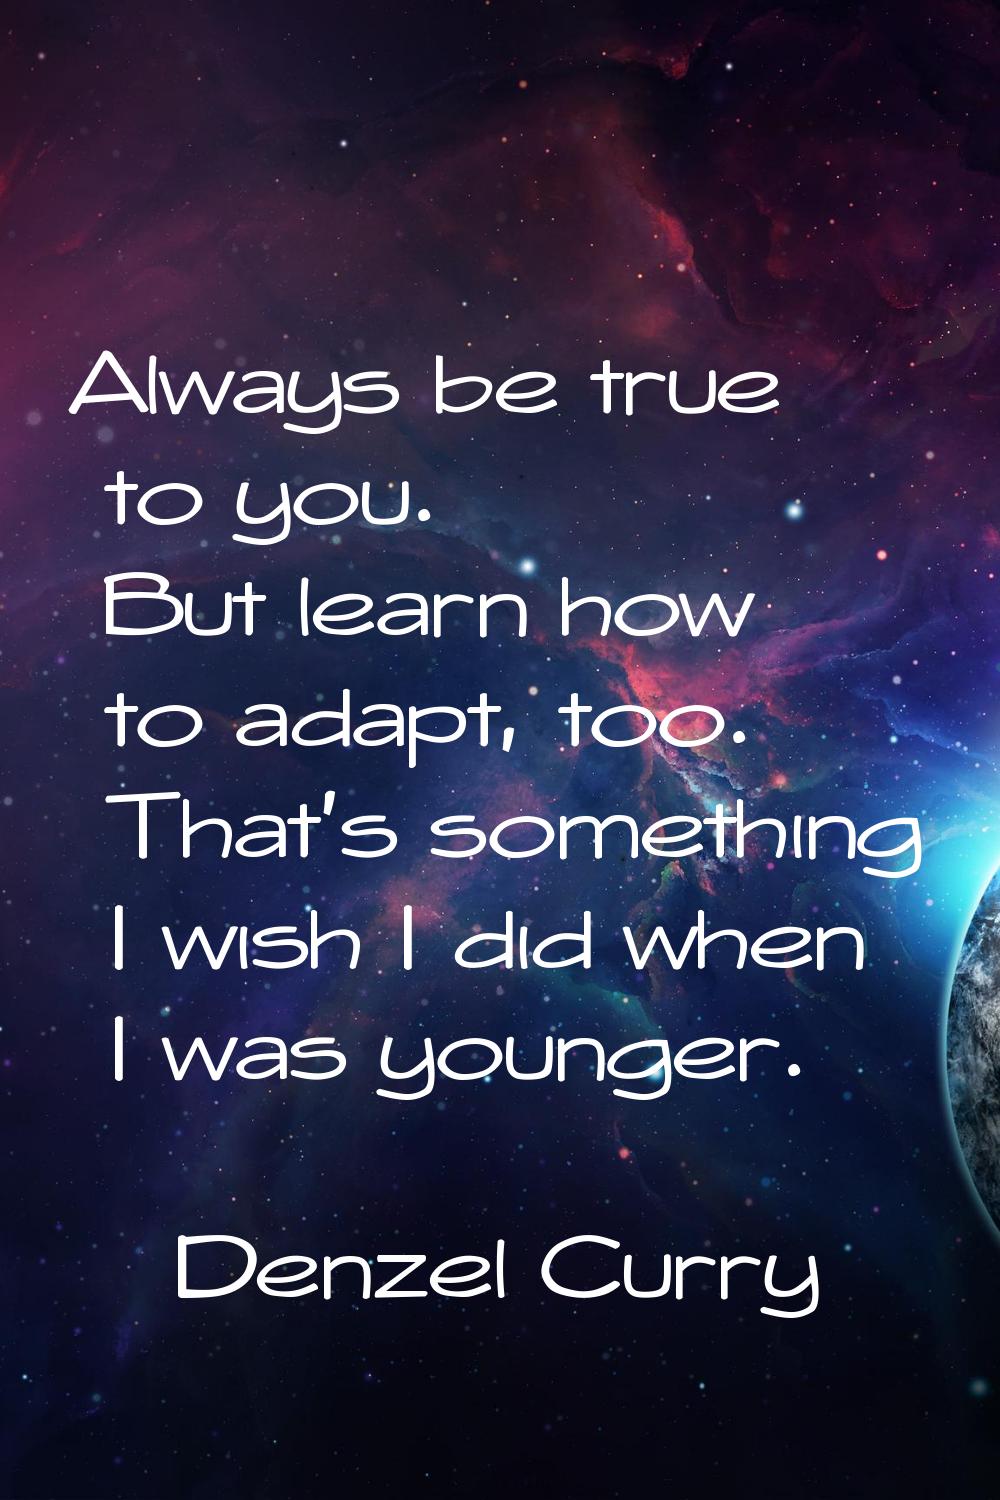 Always be true to you. But learn how to adapt, too. That's something I wish I did when I was younge